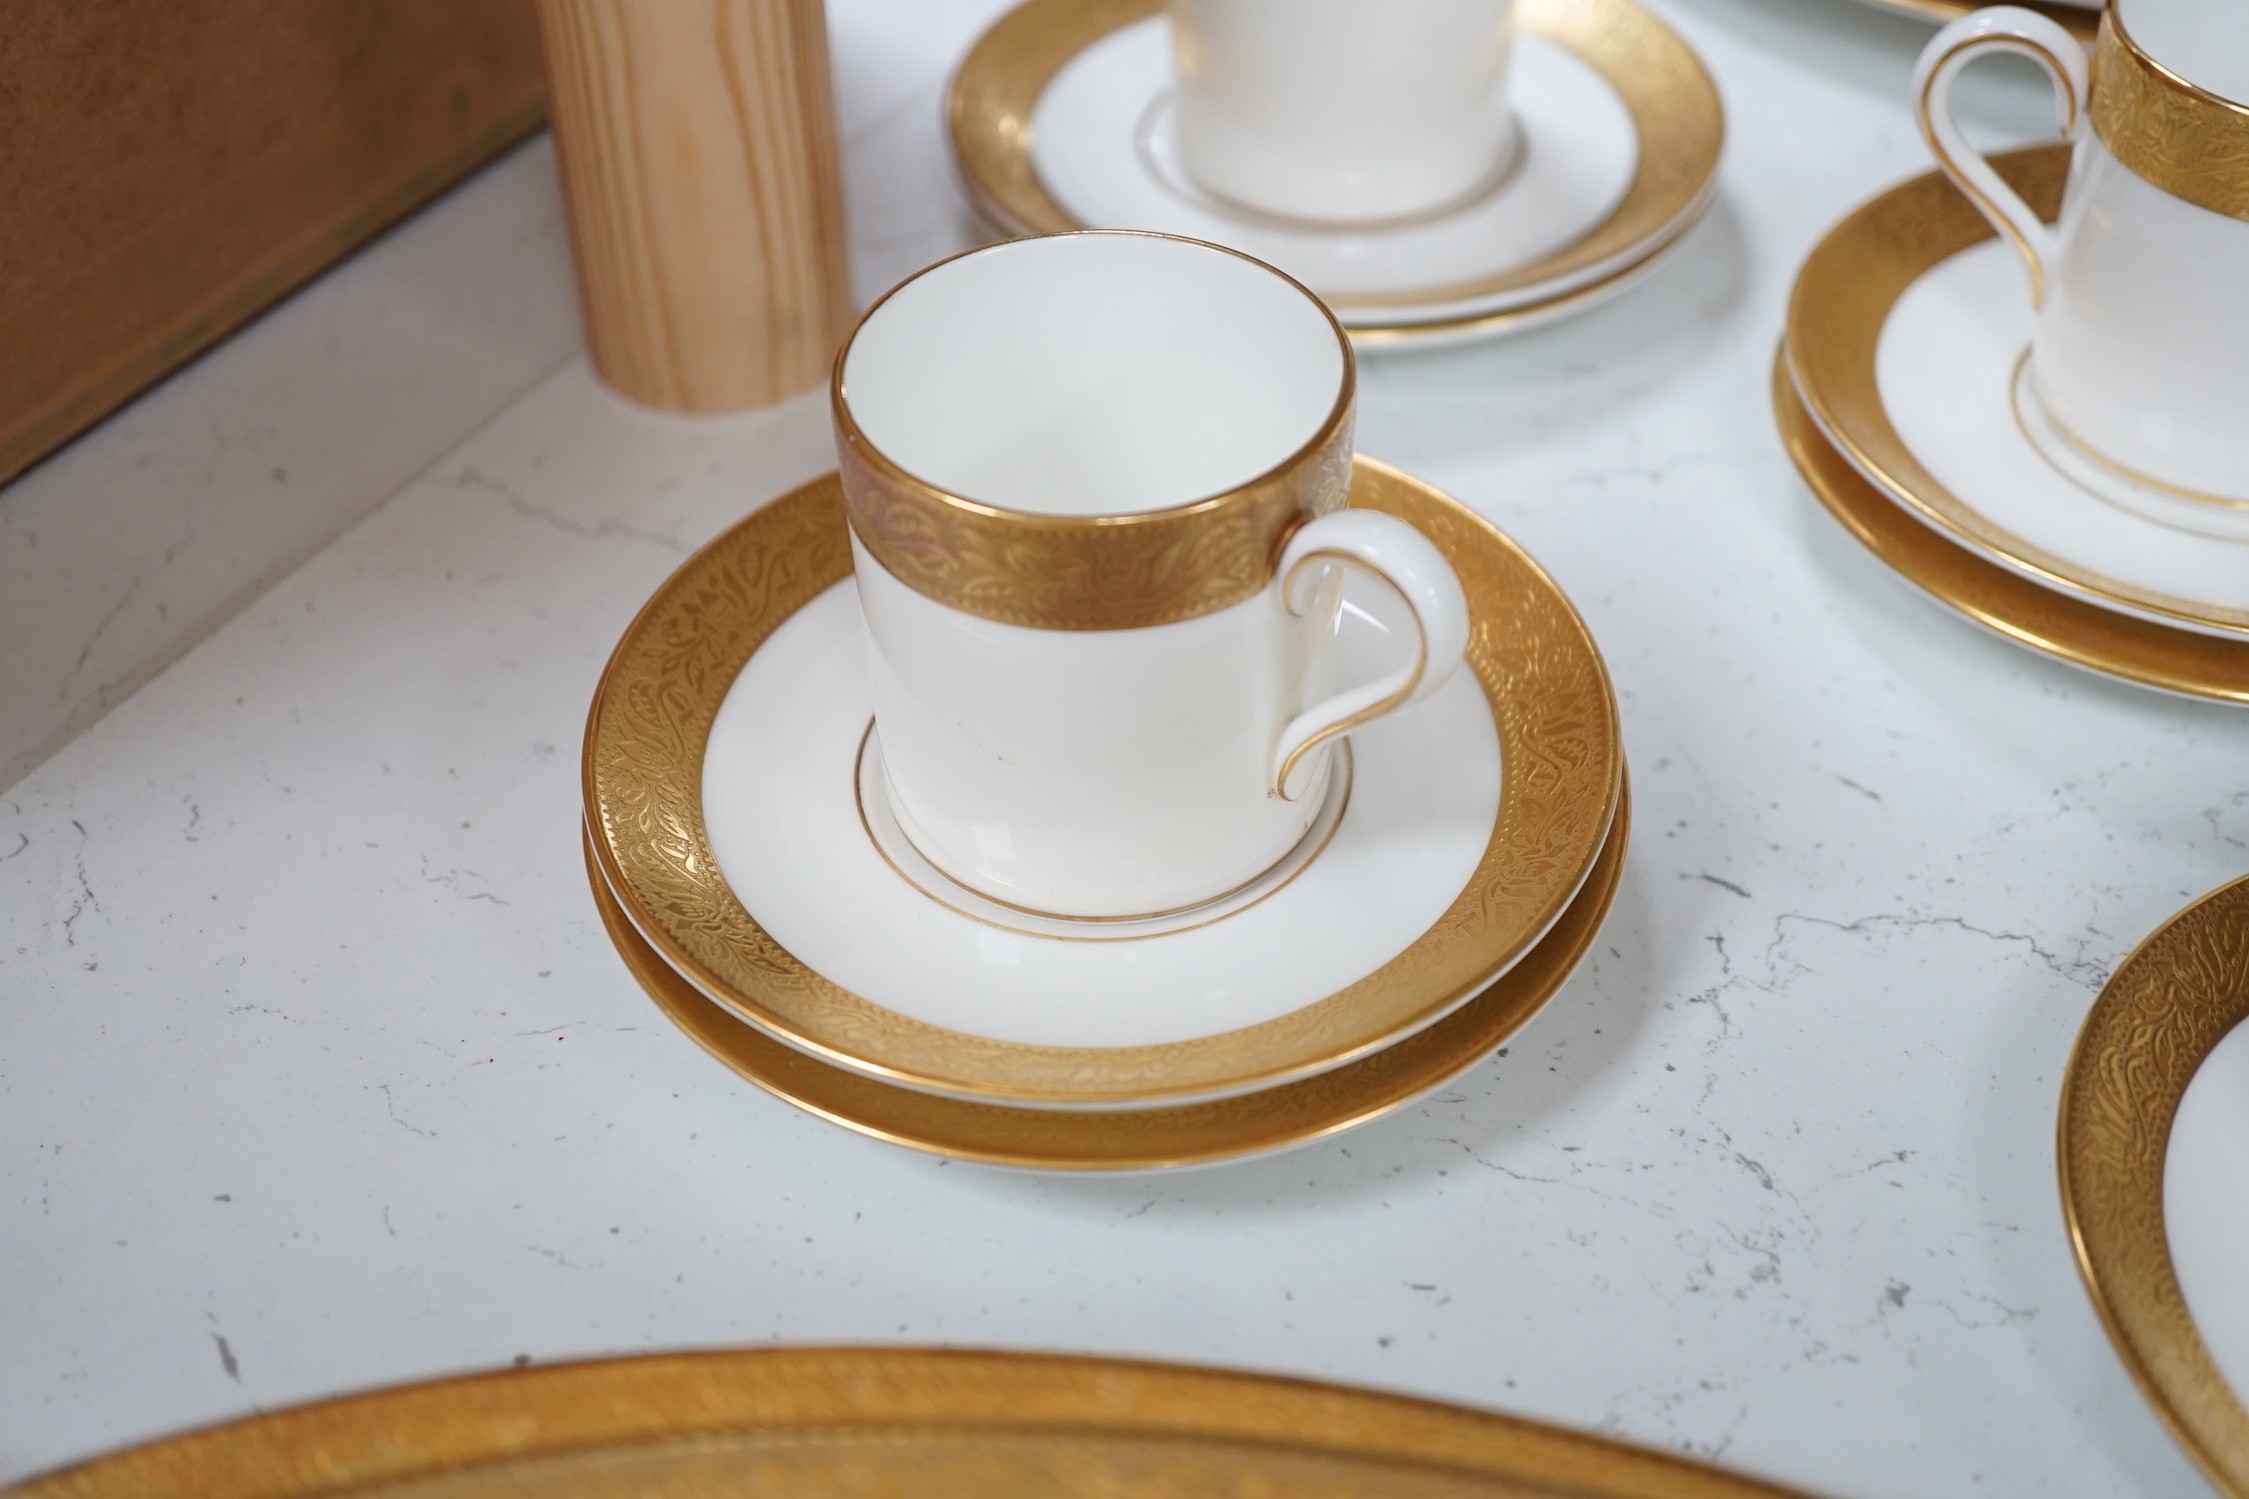 A Wedgwood Ascot pattern dinner service